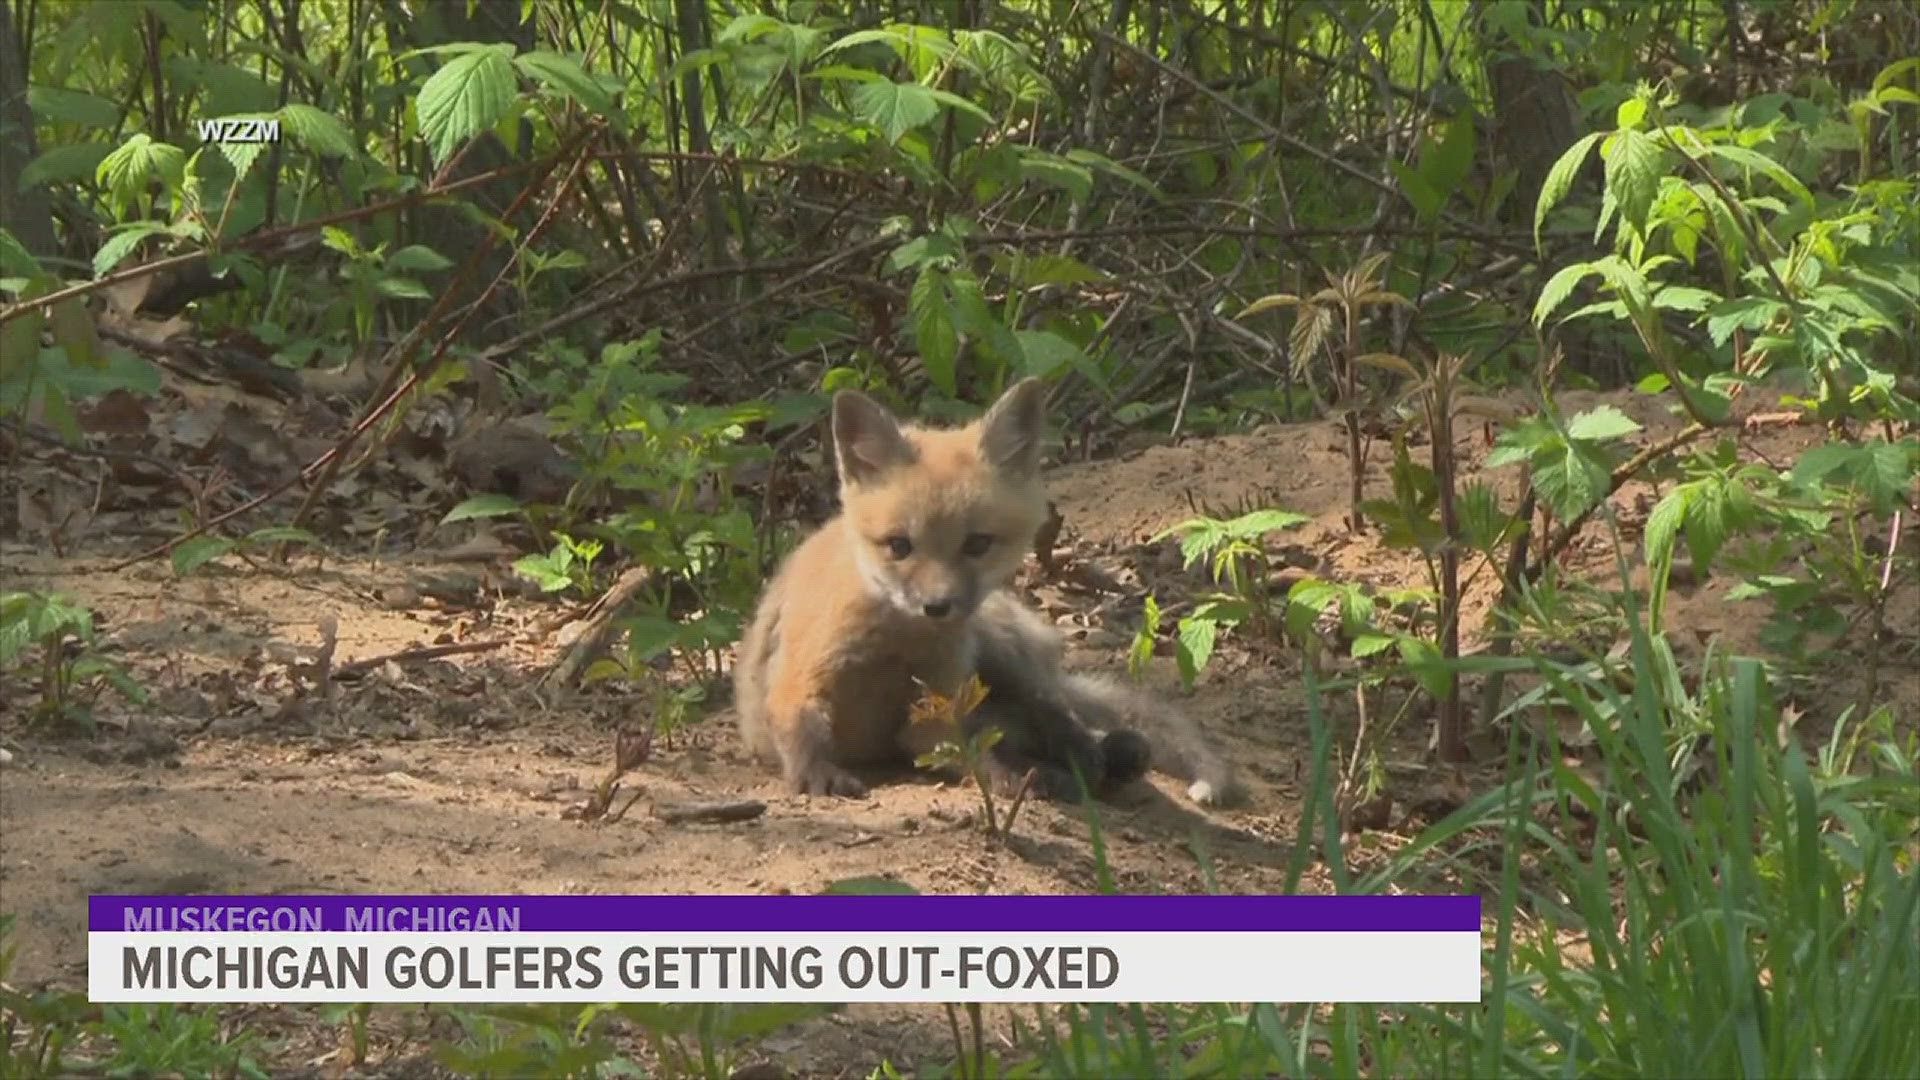 A Muskegon Community College golf course have had a problem with golf balls disappearing. A family of foxes were caught on camera stealing the balls.